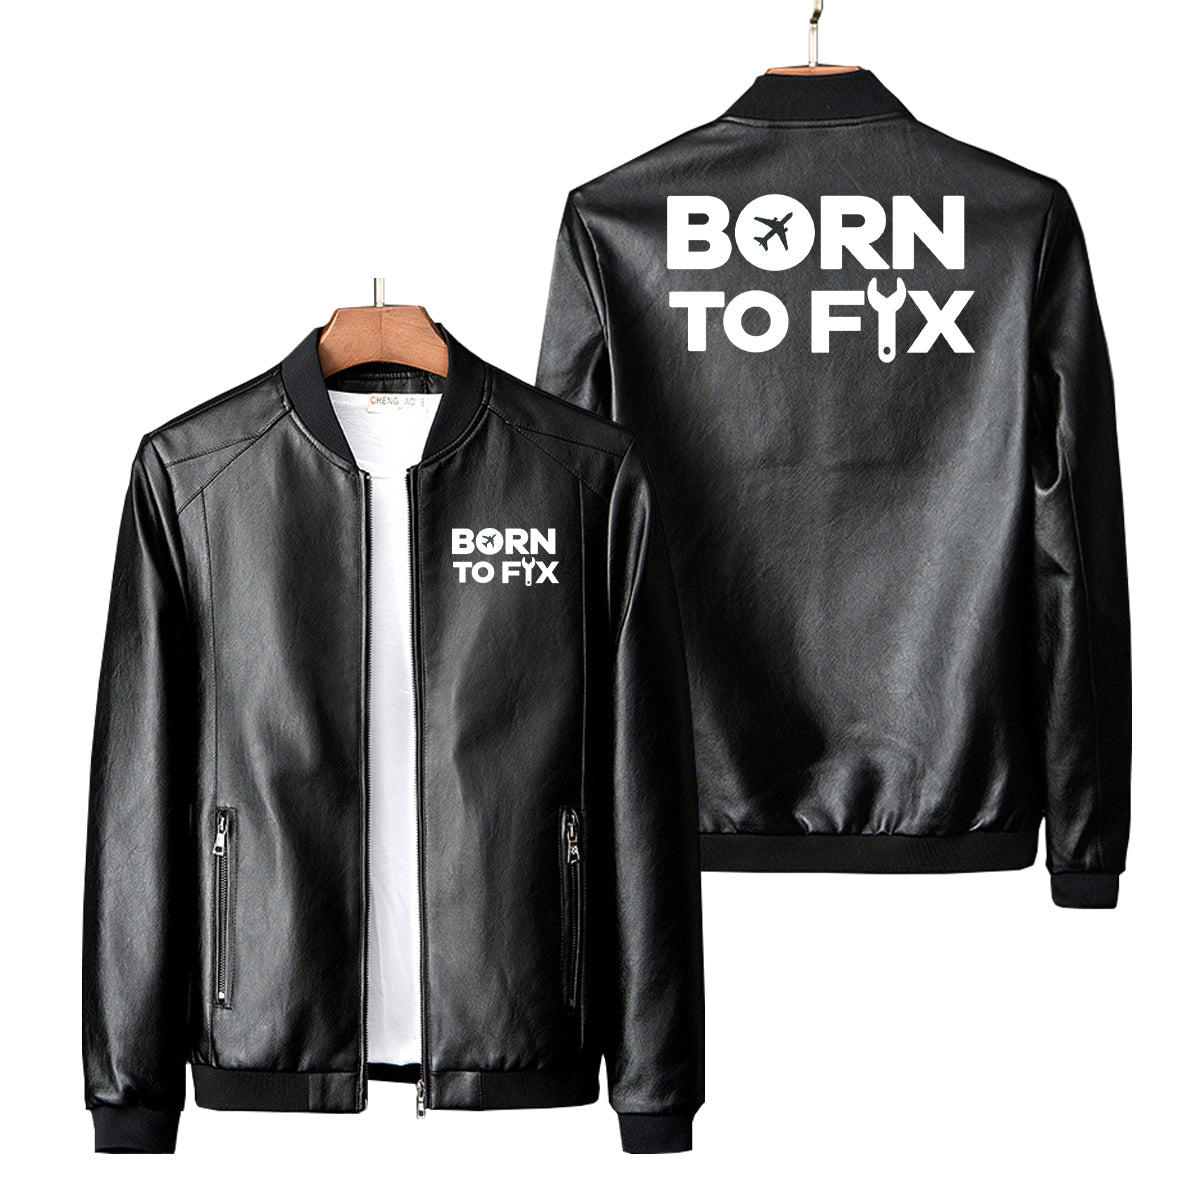 Born To Fix Airplanes Designed PU Leather Jackets